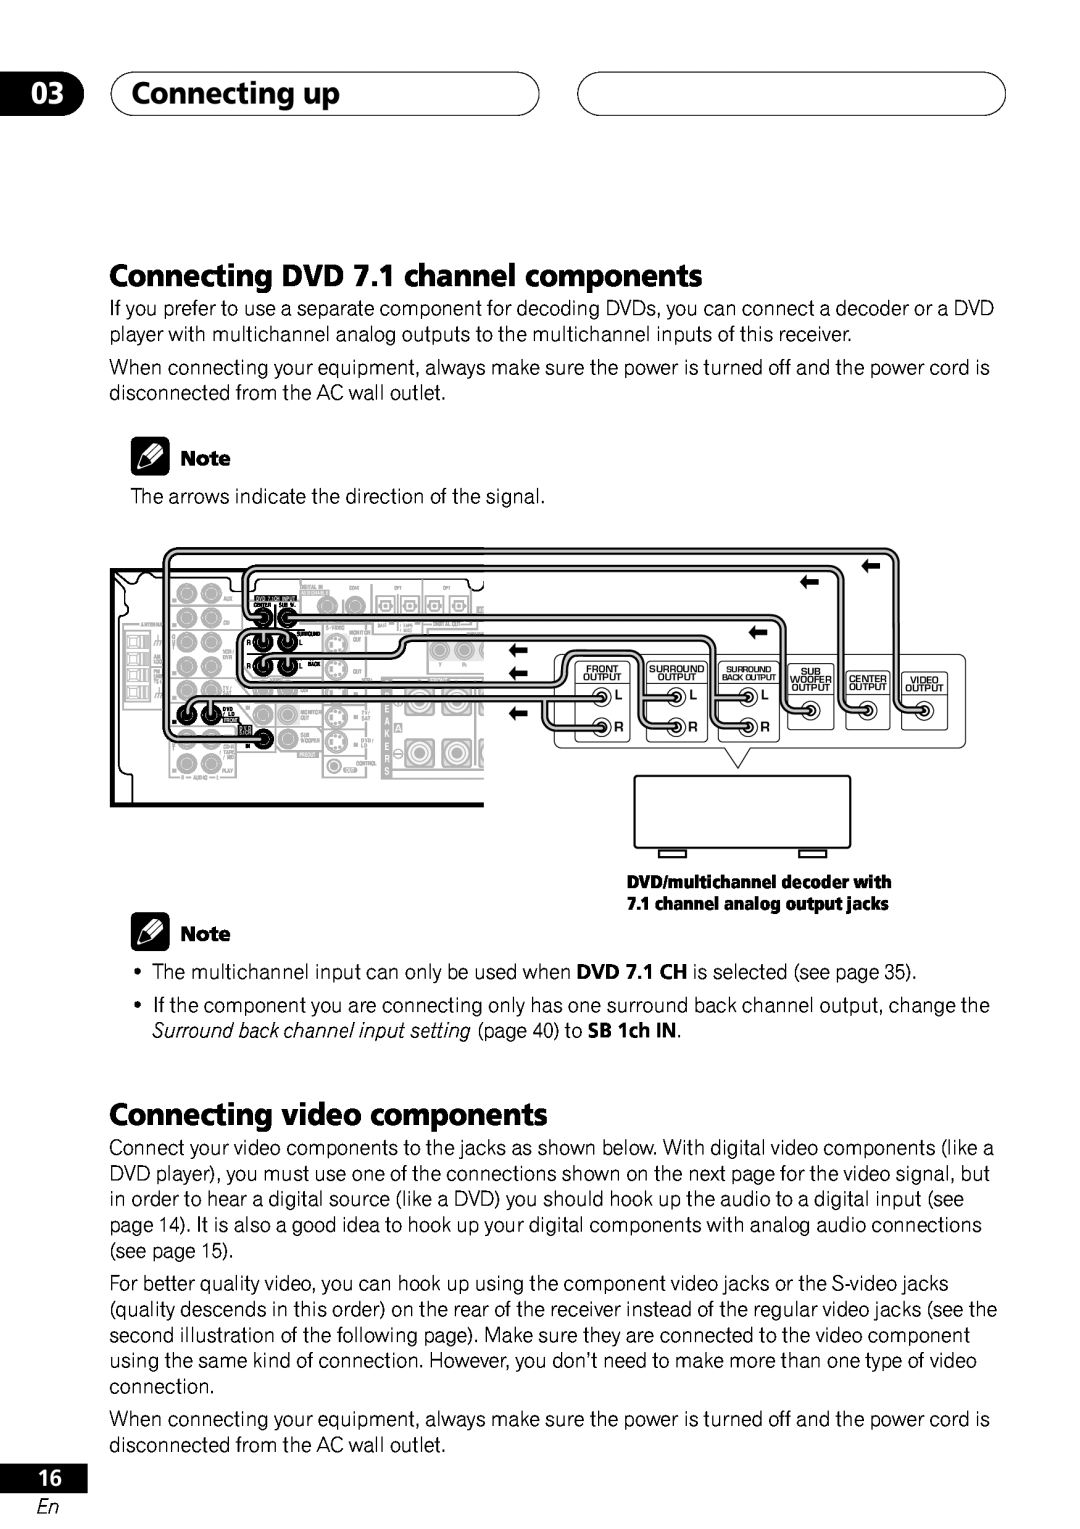 Pioneer VSX-41 manual Connecting up, Connecting DVD 7.1 channel components, Connecting video components 